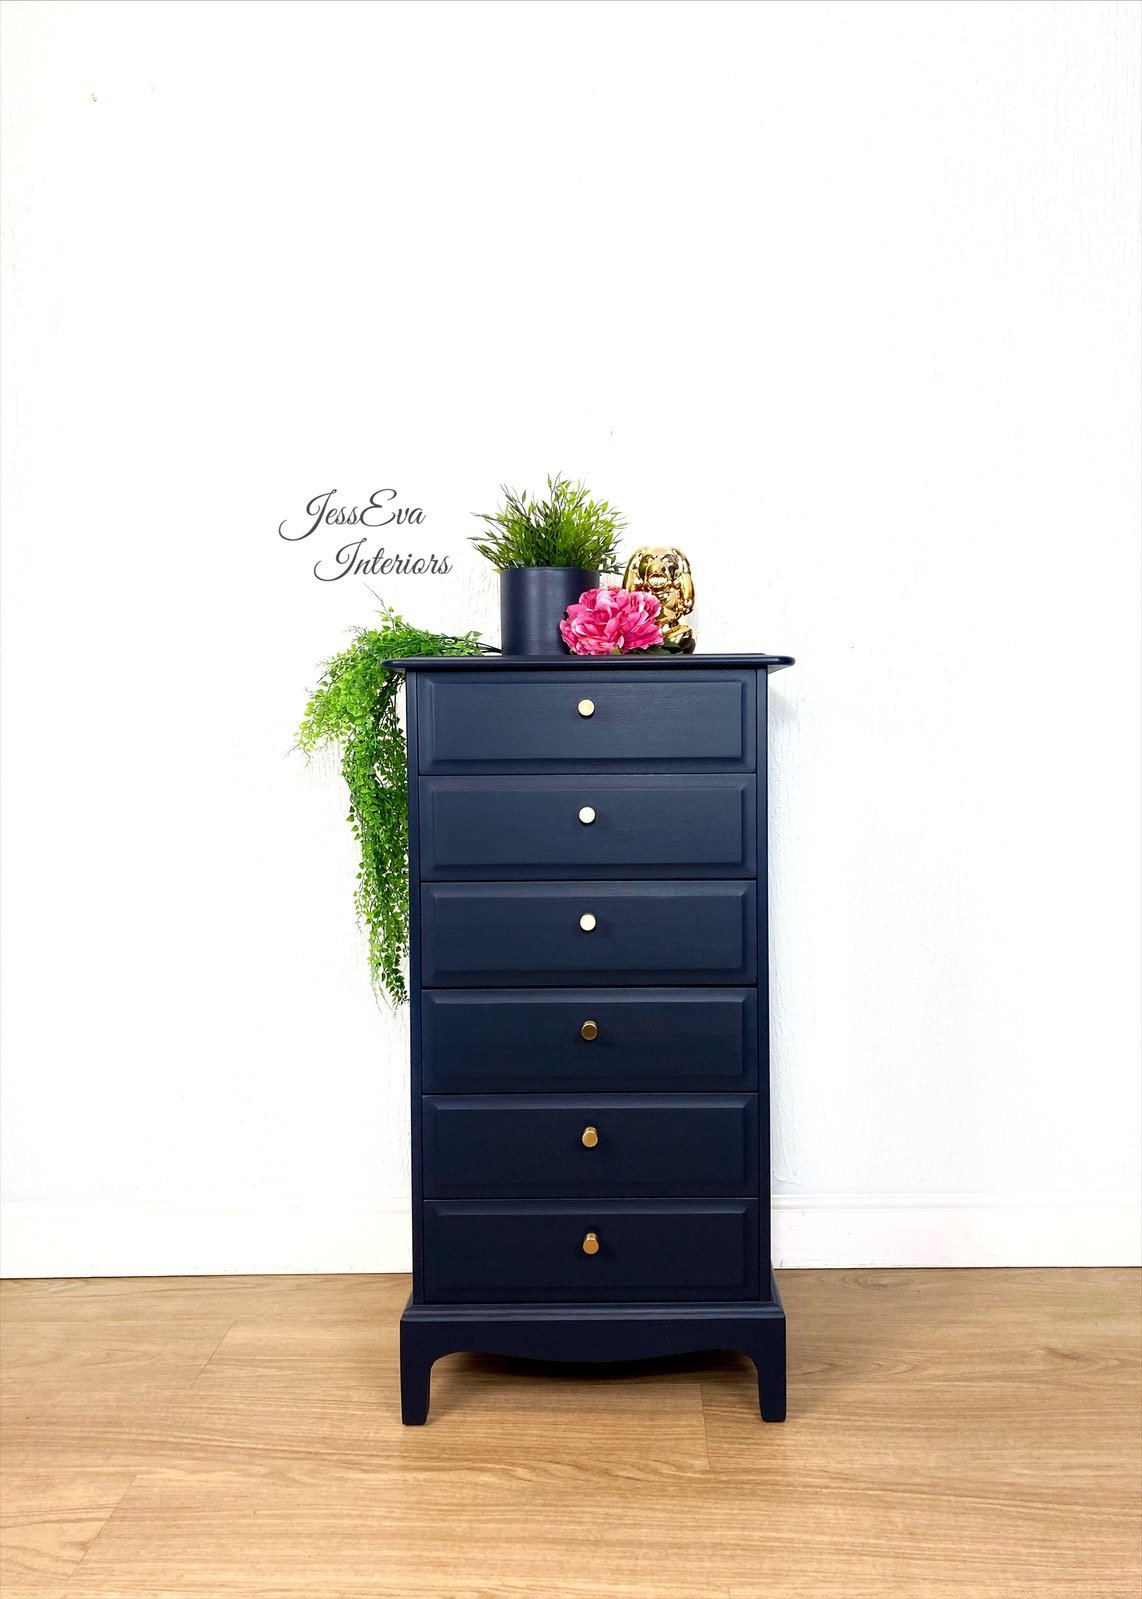 Stag Minstrel Tallboy / Chest Of Drawers painted in navy blue.